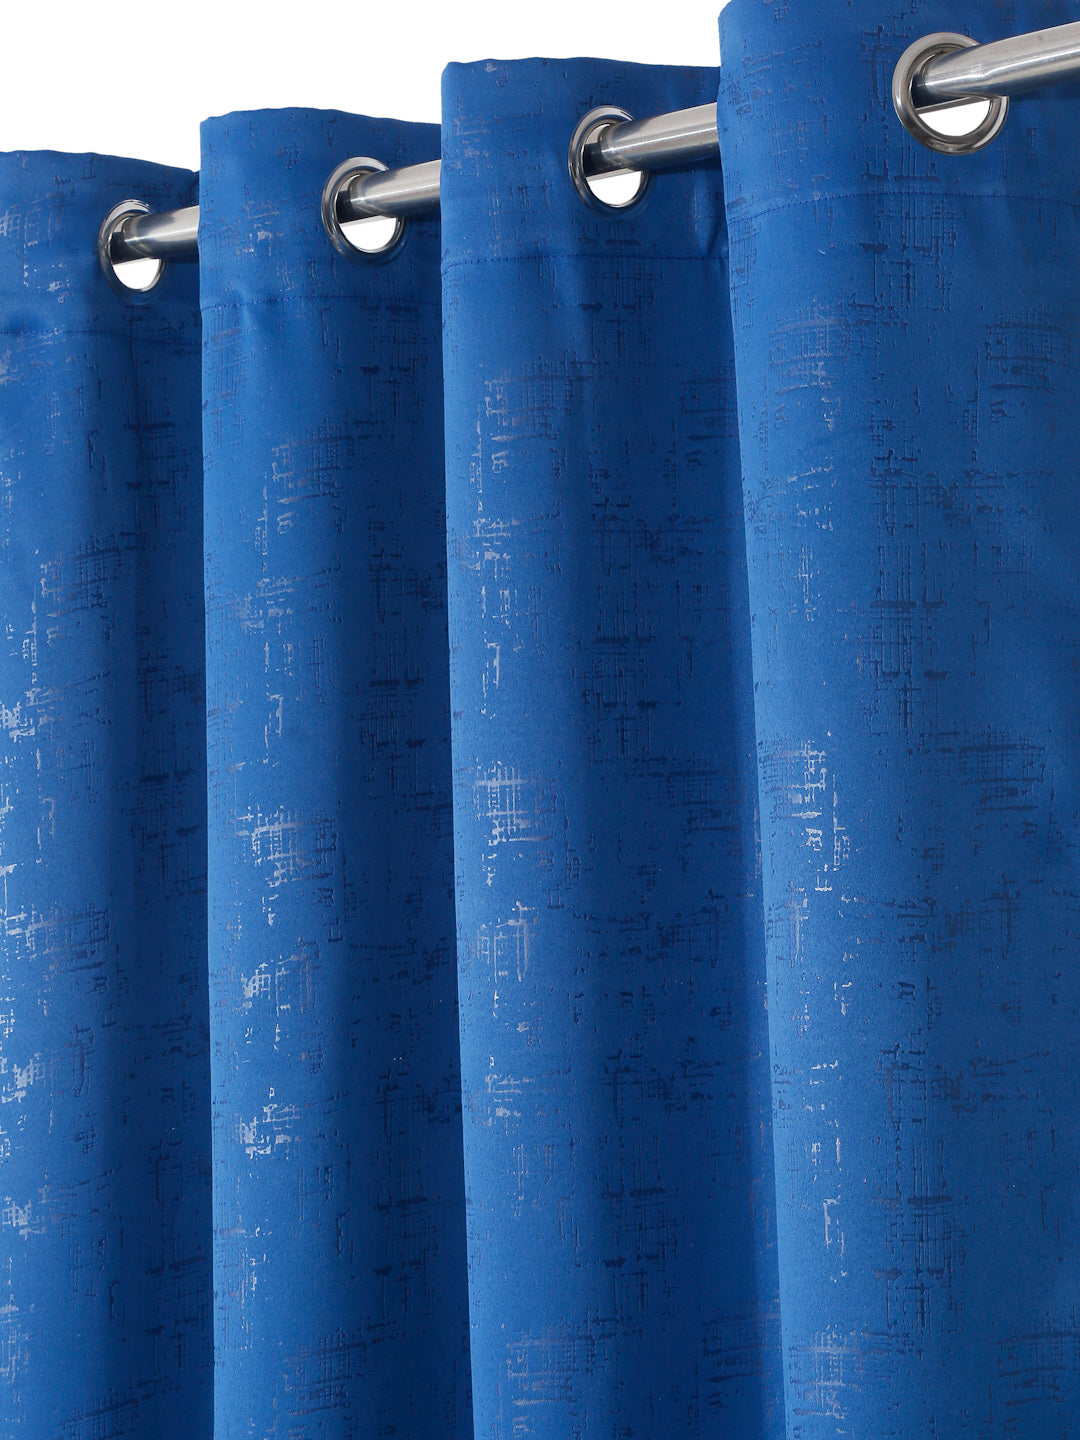 Pack of 2 Polyester Blackout Emboss Window Curtains- Navy Blue